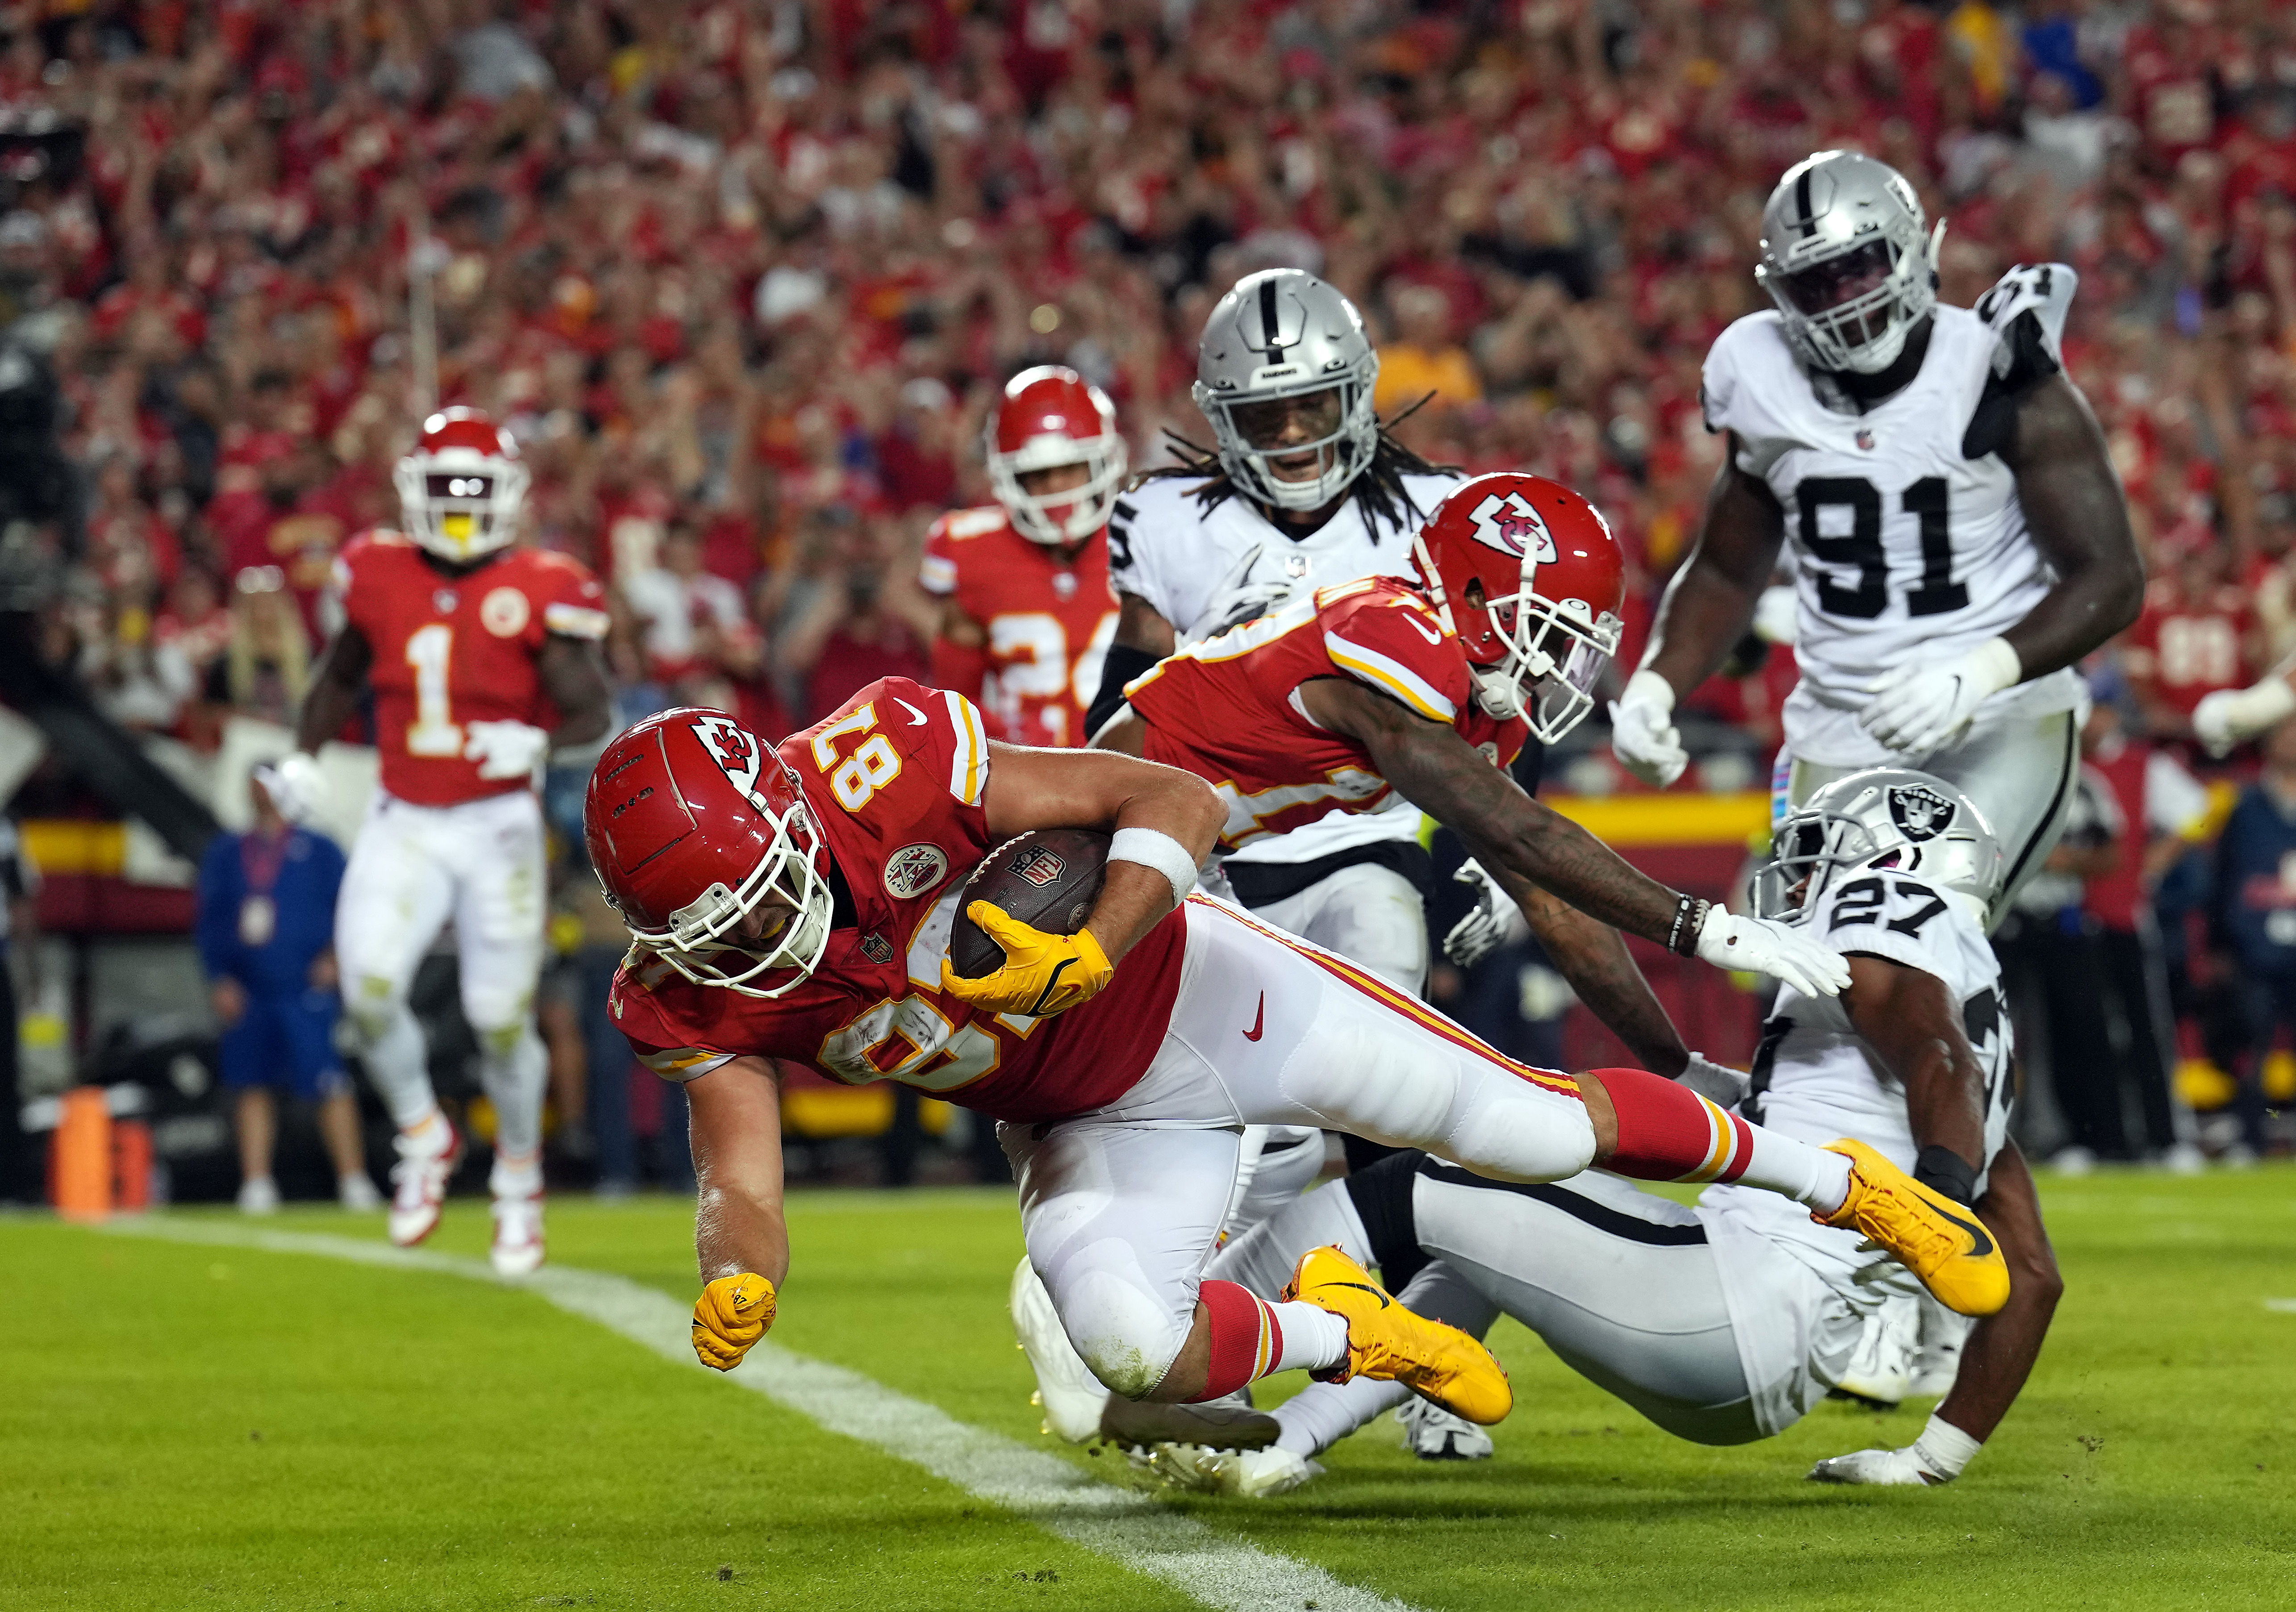 Tight end Travis Kelce (#87) of the Kansas City Chiefs scores a touchdown in the game against the Las Vegas Raiders at Arrowhead Stadium in Kansas City, Missouri, October 10, 2022. /CFP